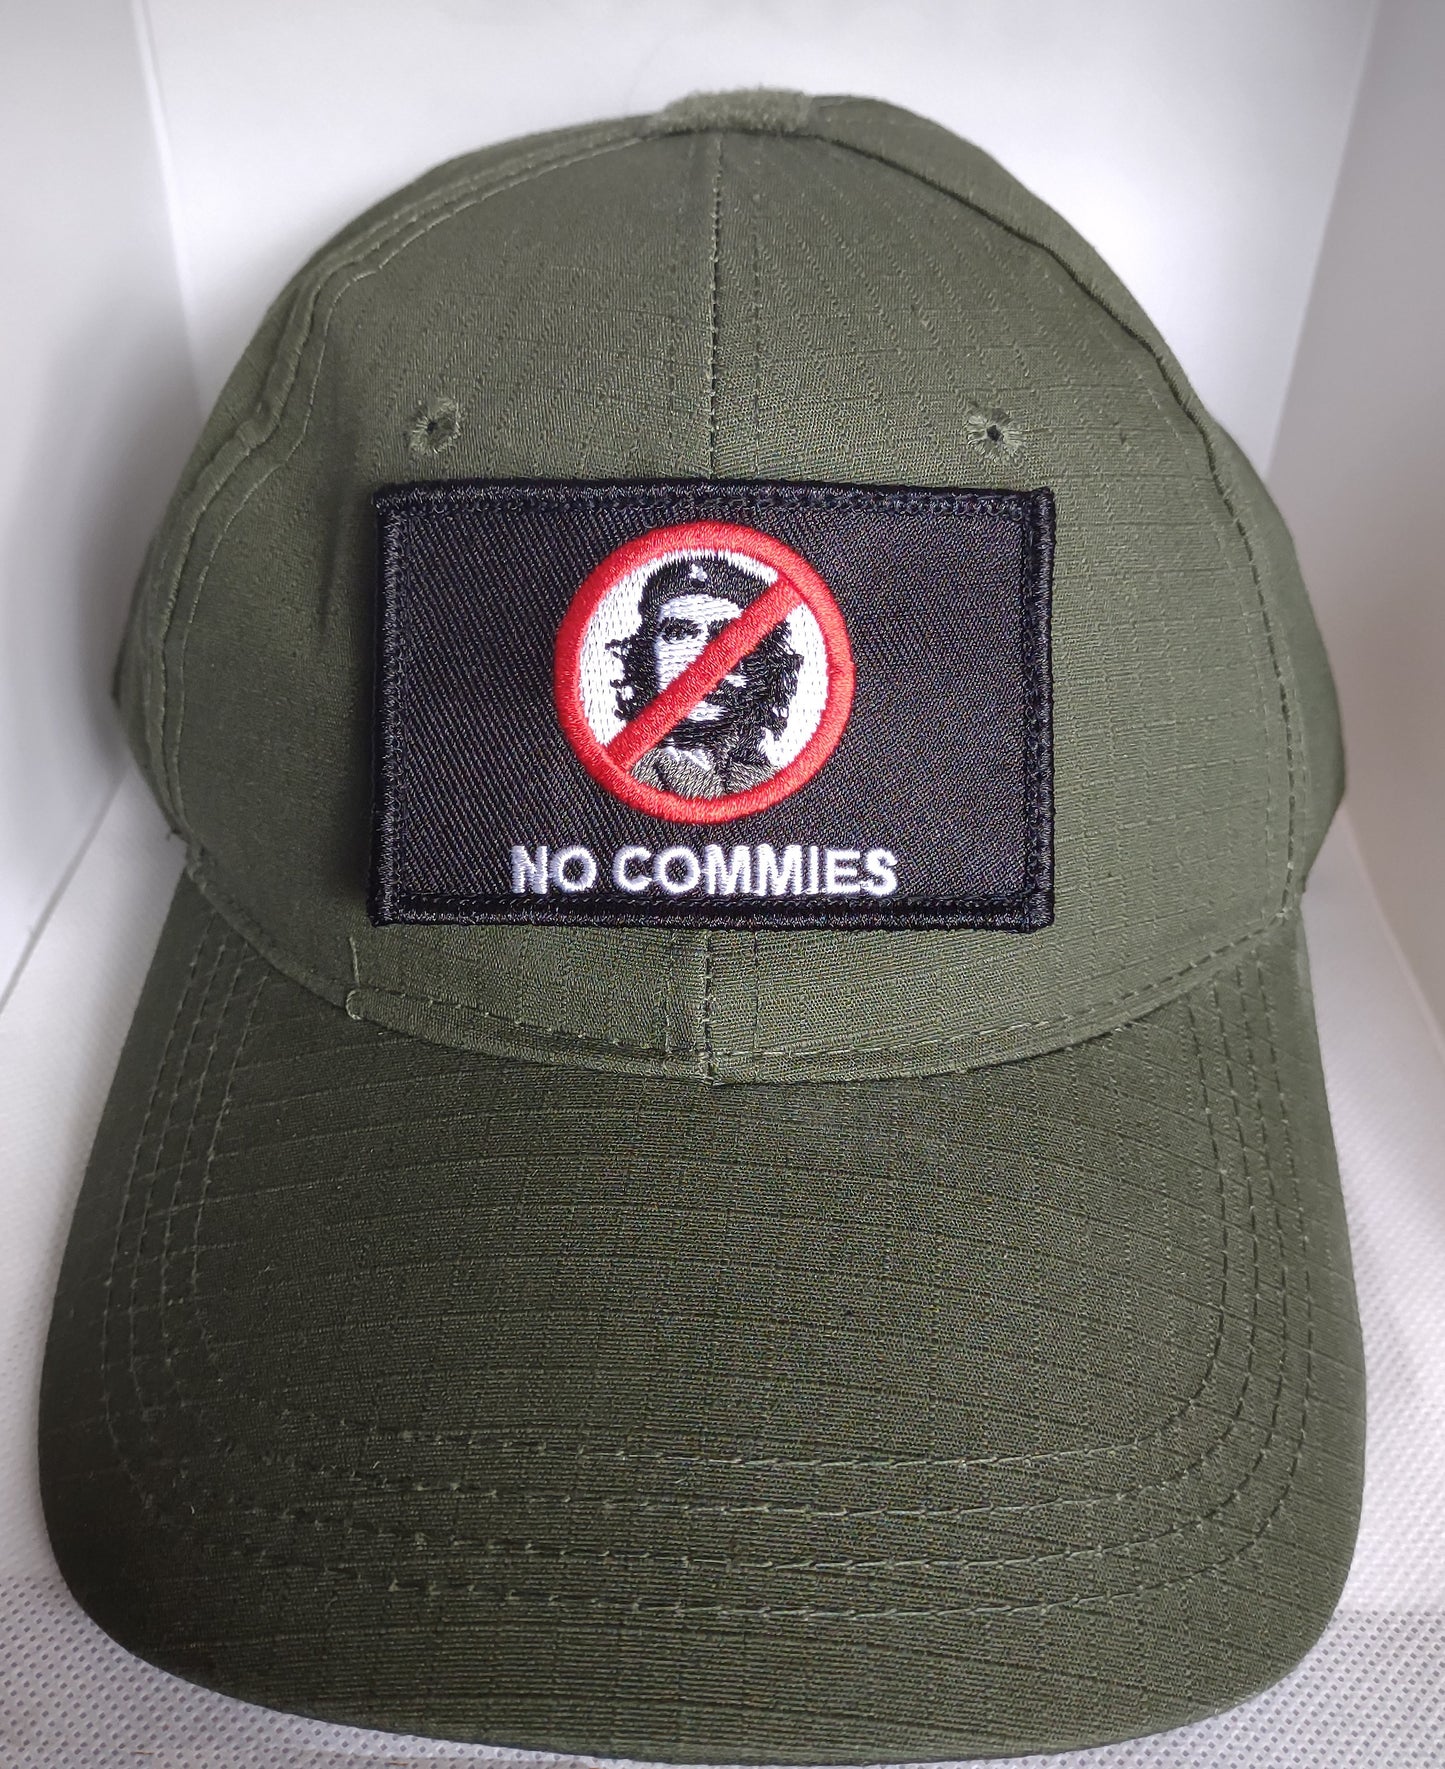 No Commies/ Anti-Che Guevara Hat Patch